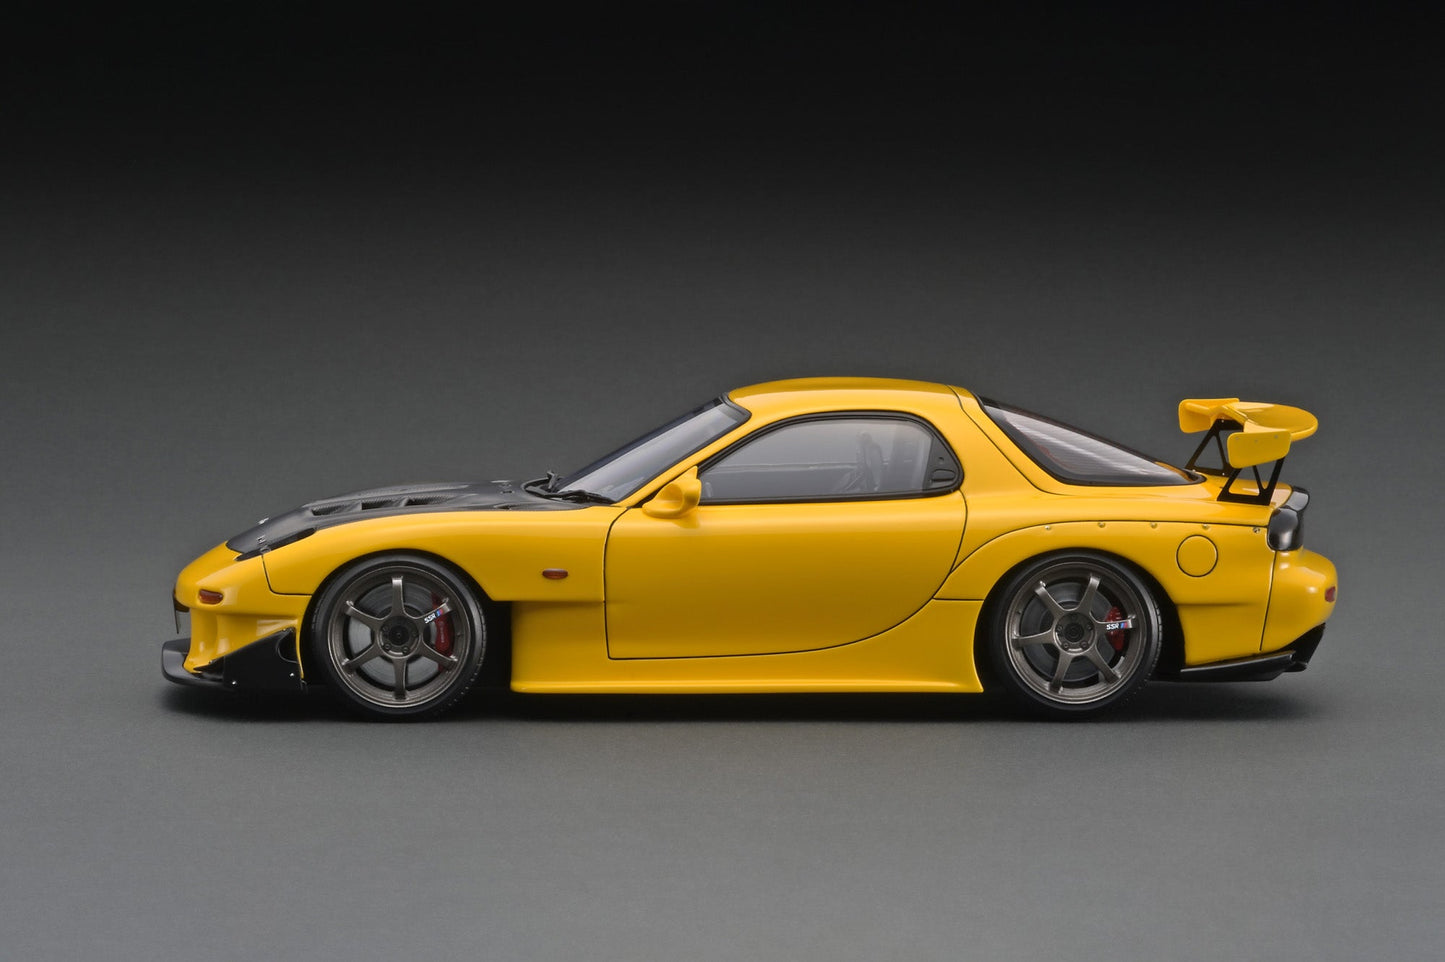 [Ignition Model] Mazda RX-7 (FD3S) - Yellow